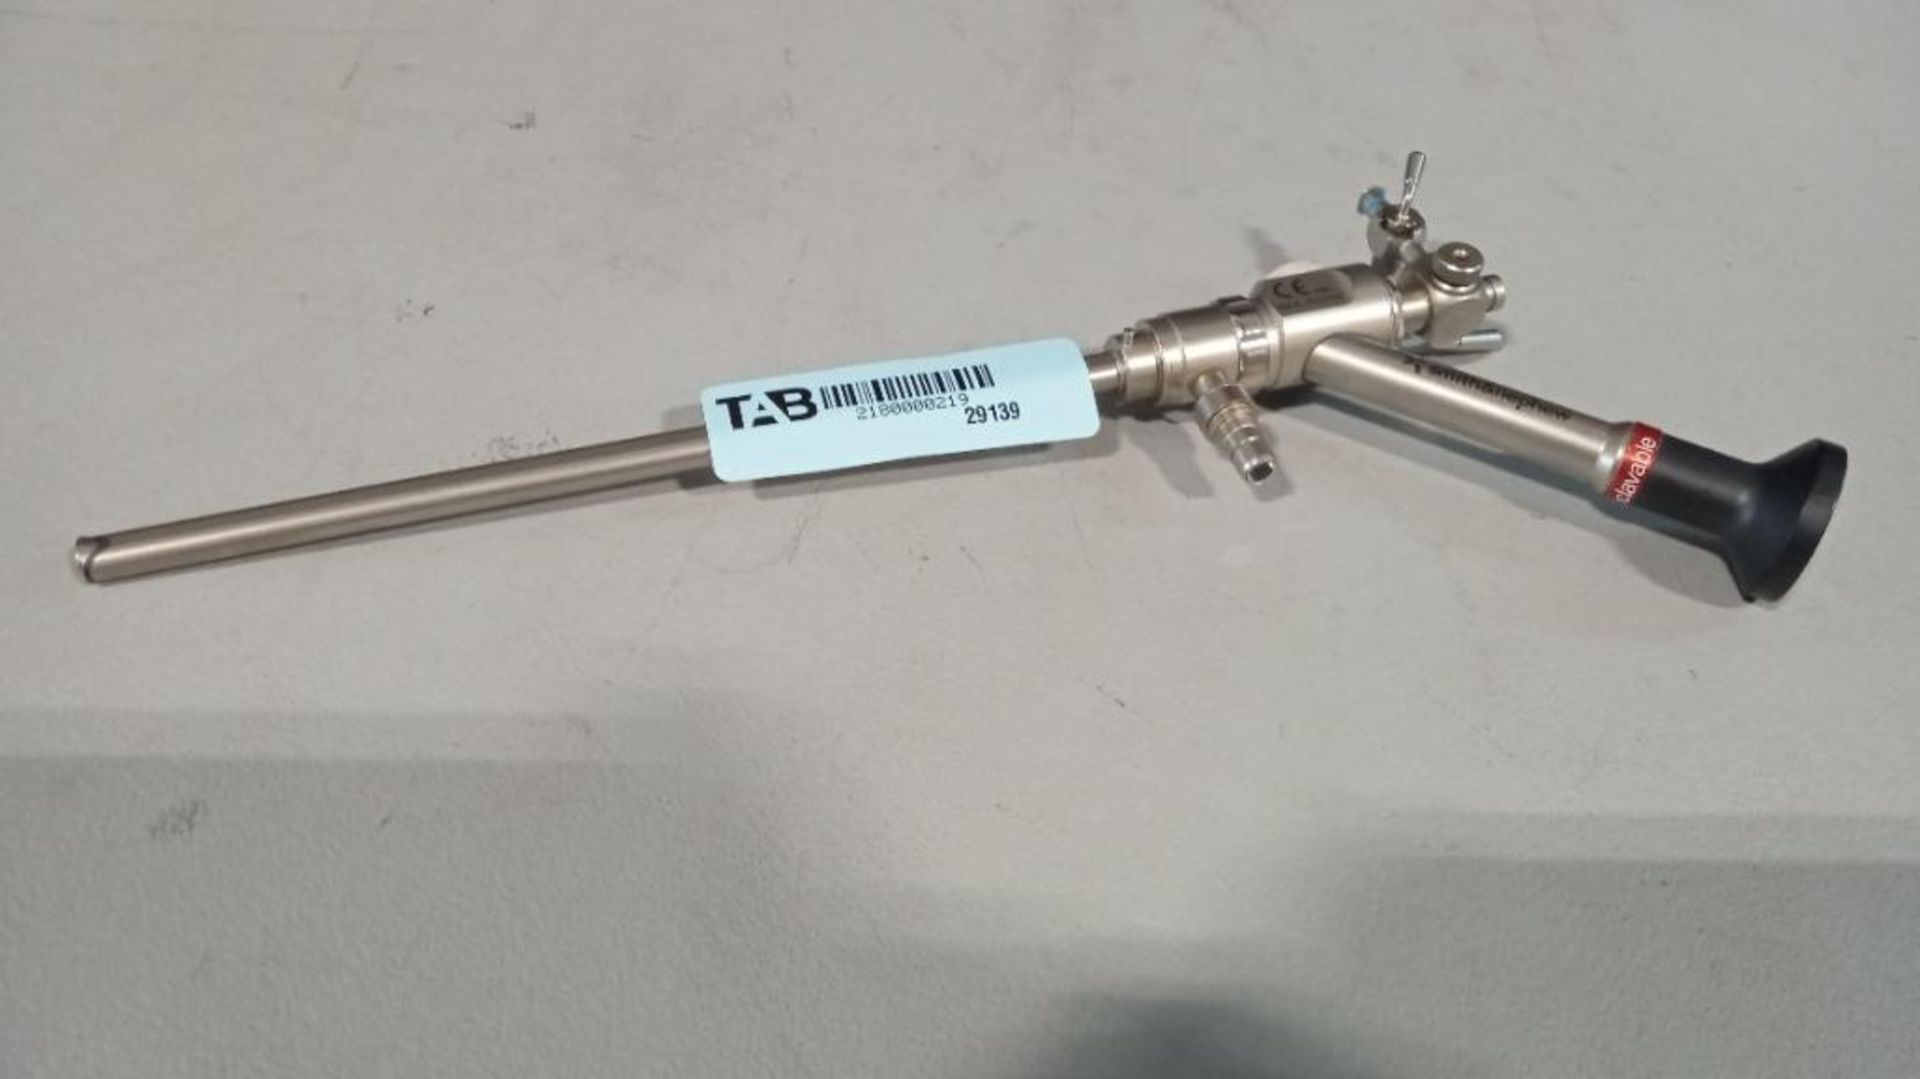 SMITH & NEPHEW 7209208 TRUCLEAR 0 DEGREE AUTOCLAVABLE HYSTEROSCOPE - Image 3 of 3